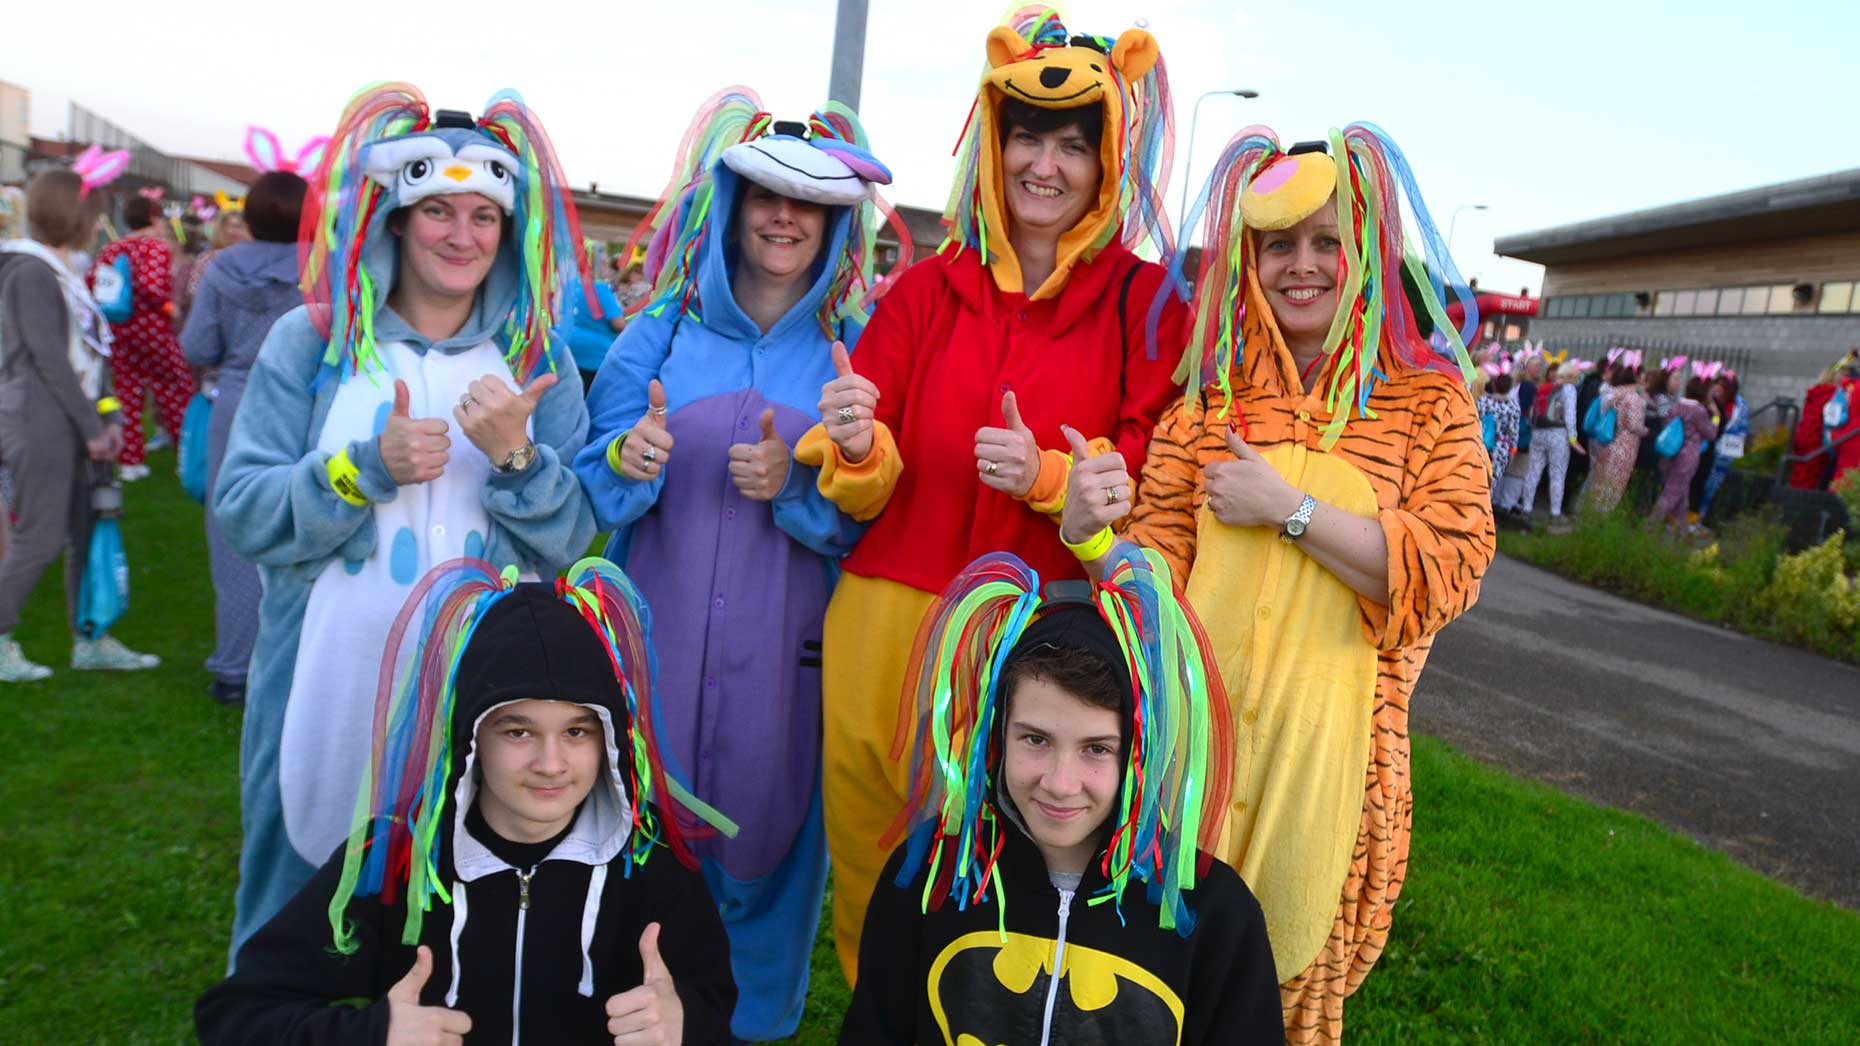 Sharon Roberts (Tigger) with her friends and family at the St Barnabas Lincolnshire Hospice Onesie walk. Photo: Steve Smailes/The Lincolnite